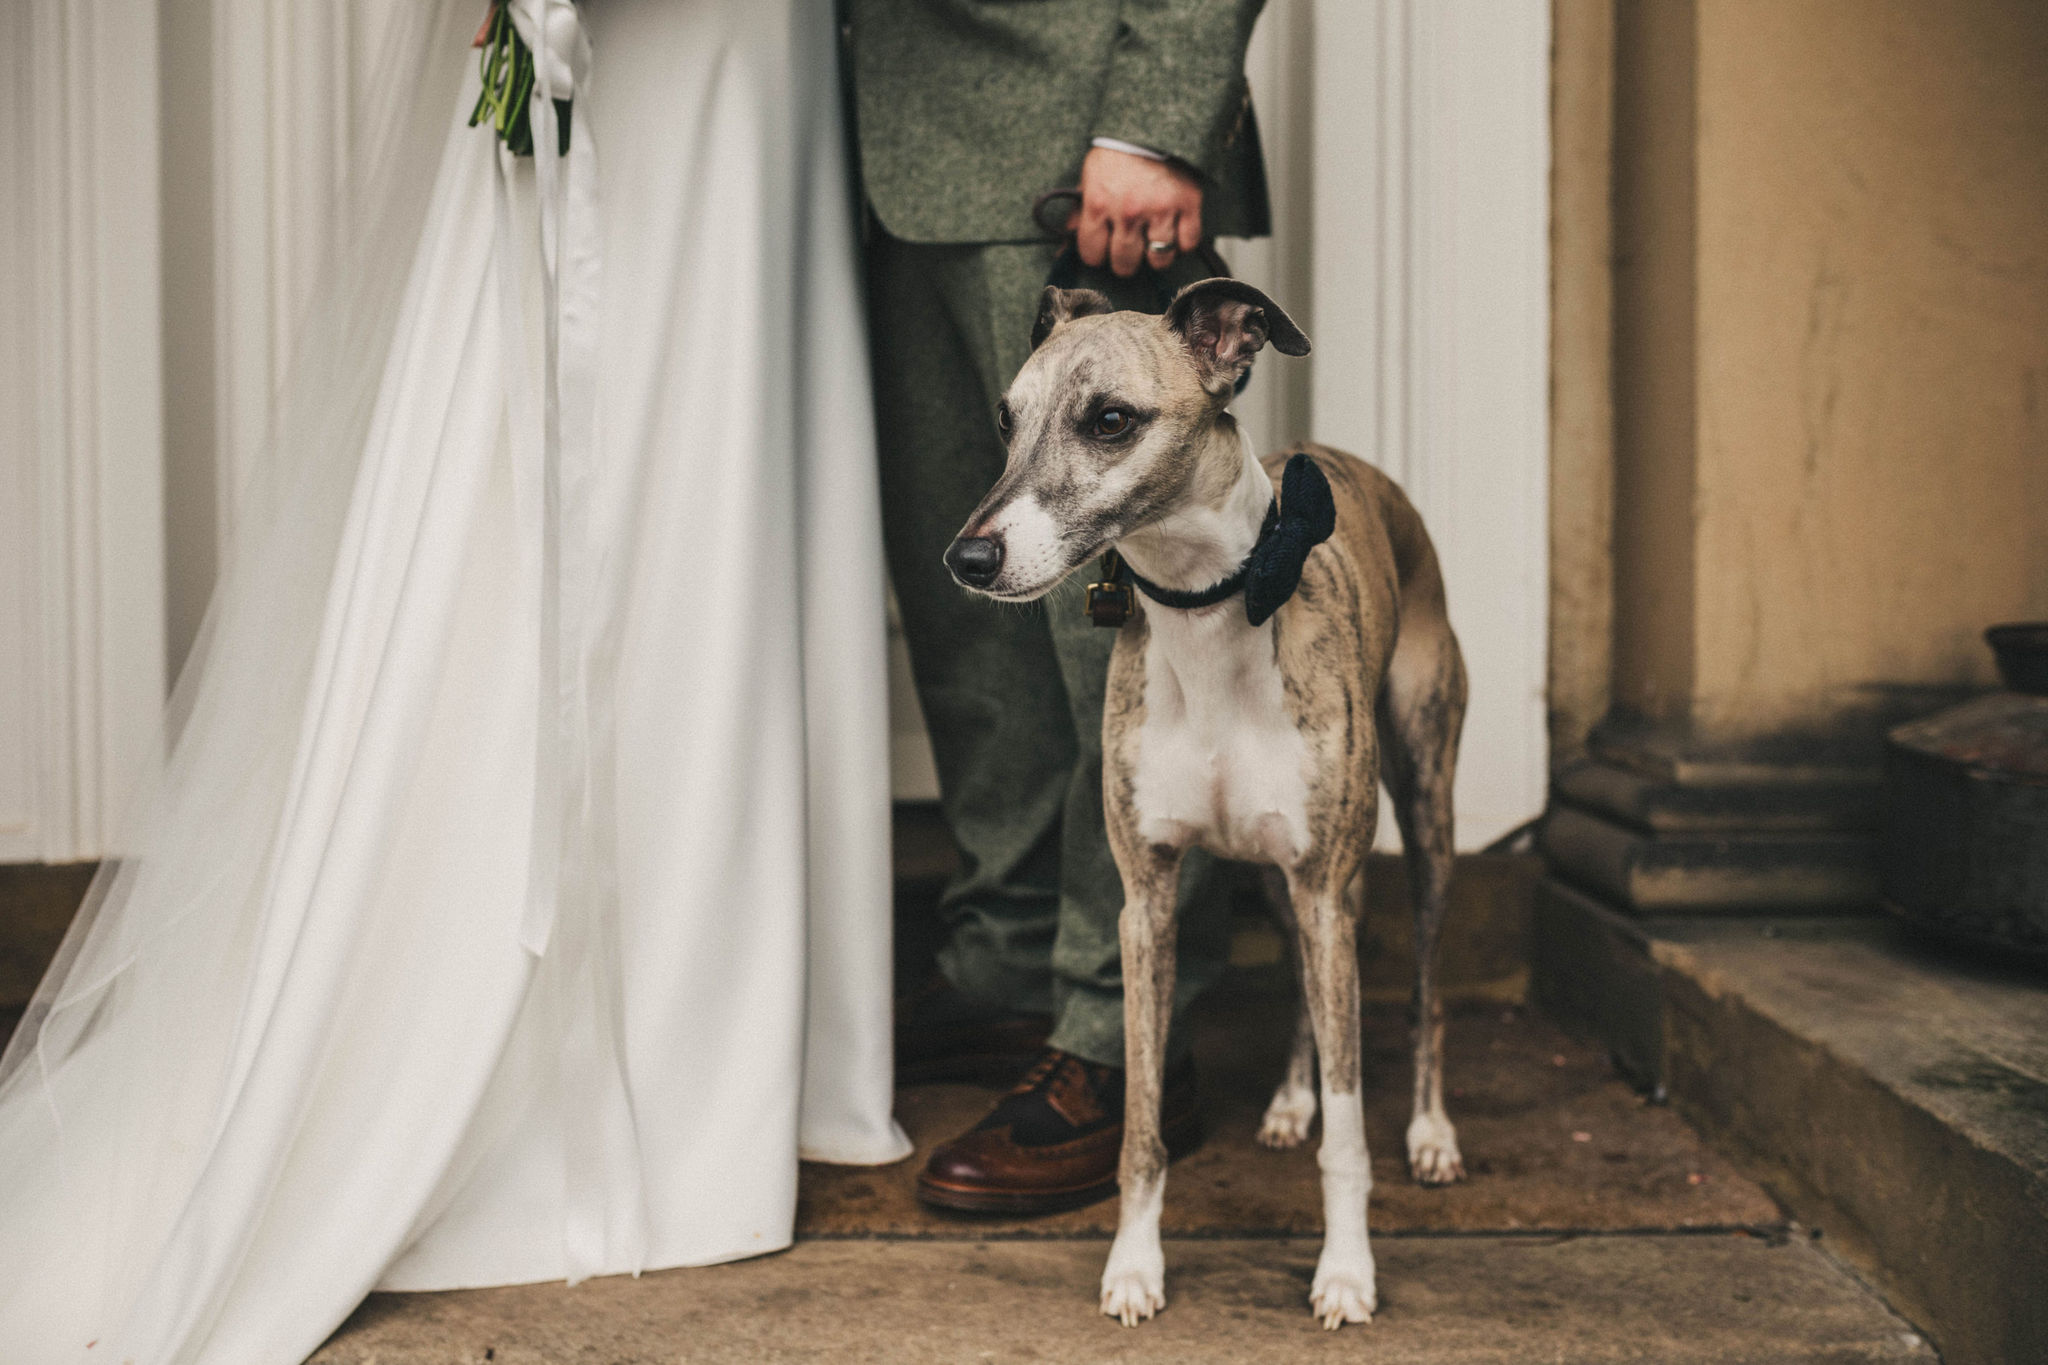 A grey whippet with white paws and a white bib stands next to a bride and groom